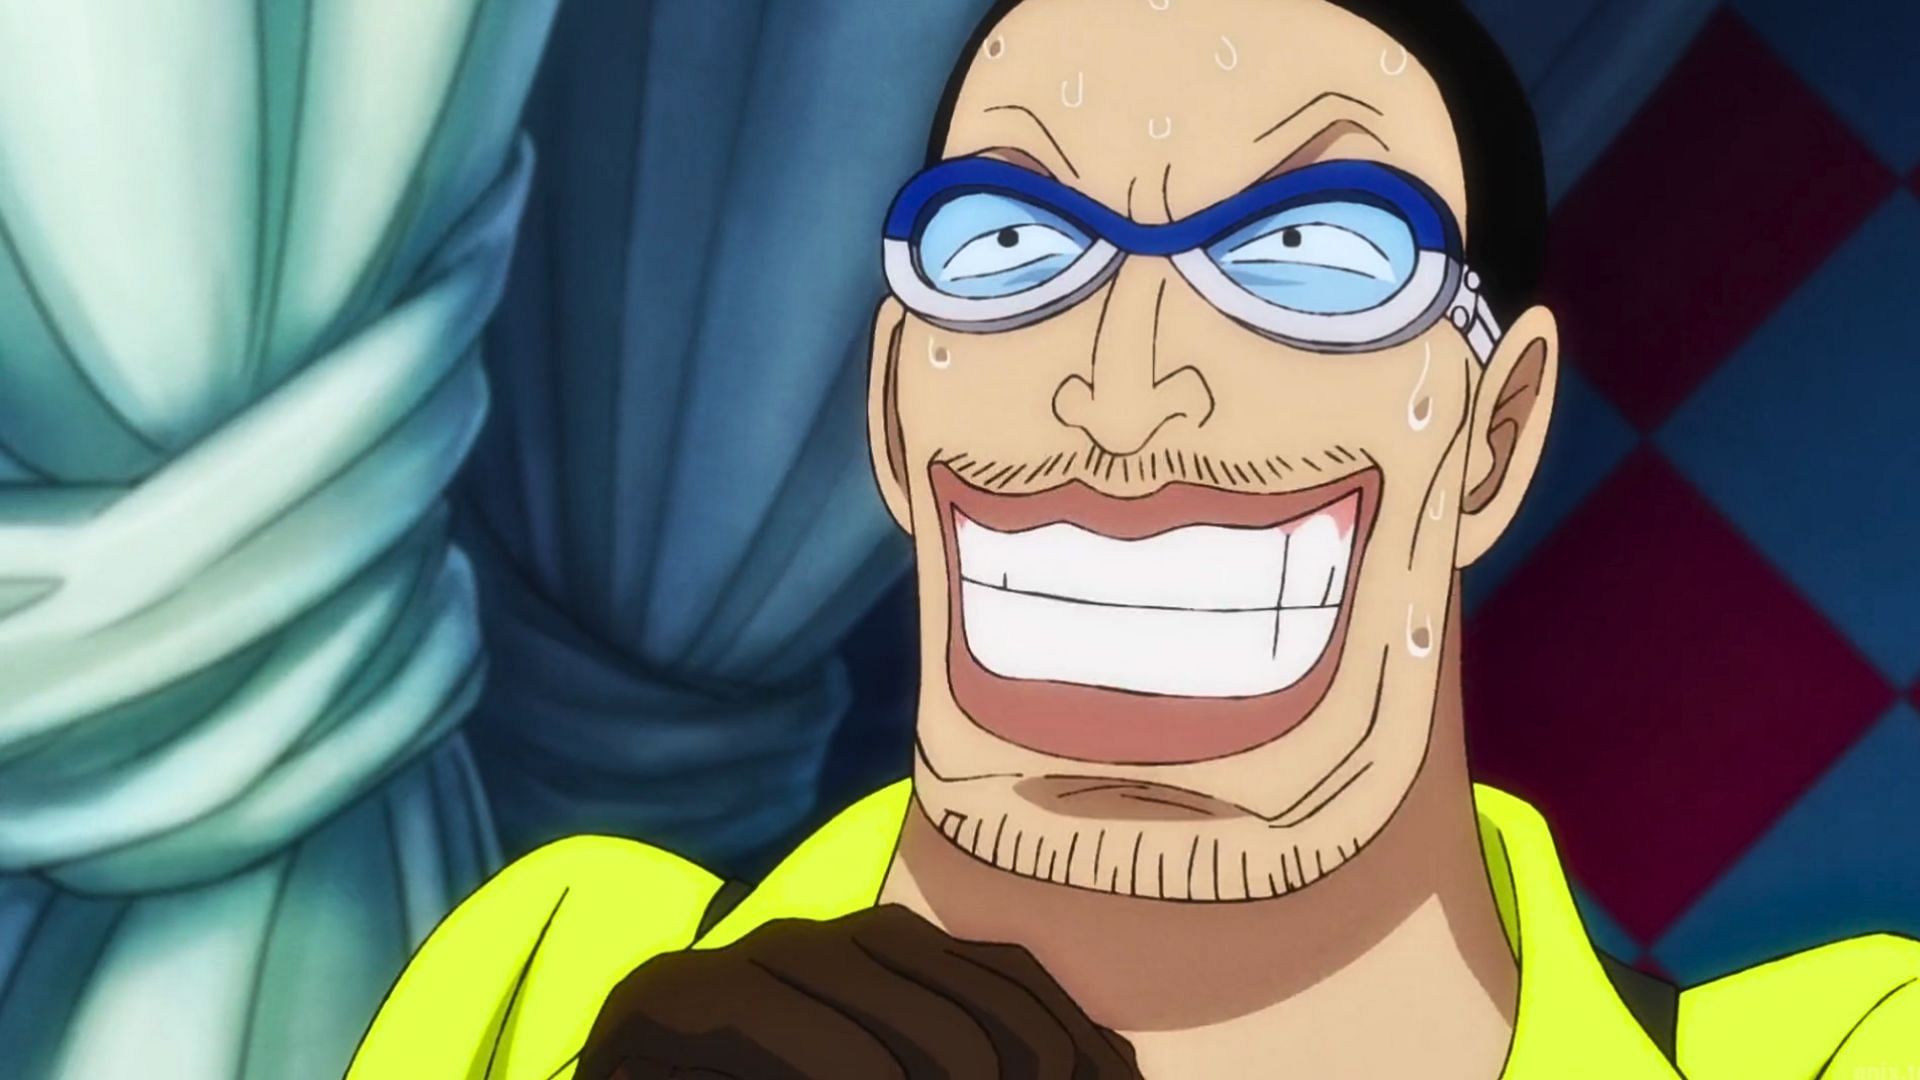 Mr. 3 as seen in the One Piece anime (Image via Toei)